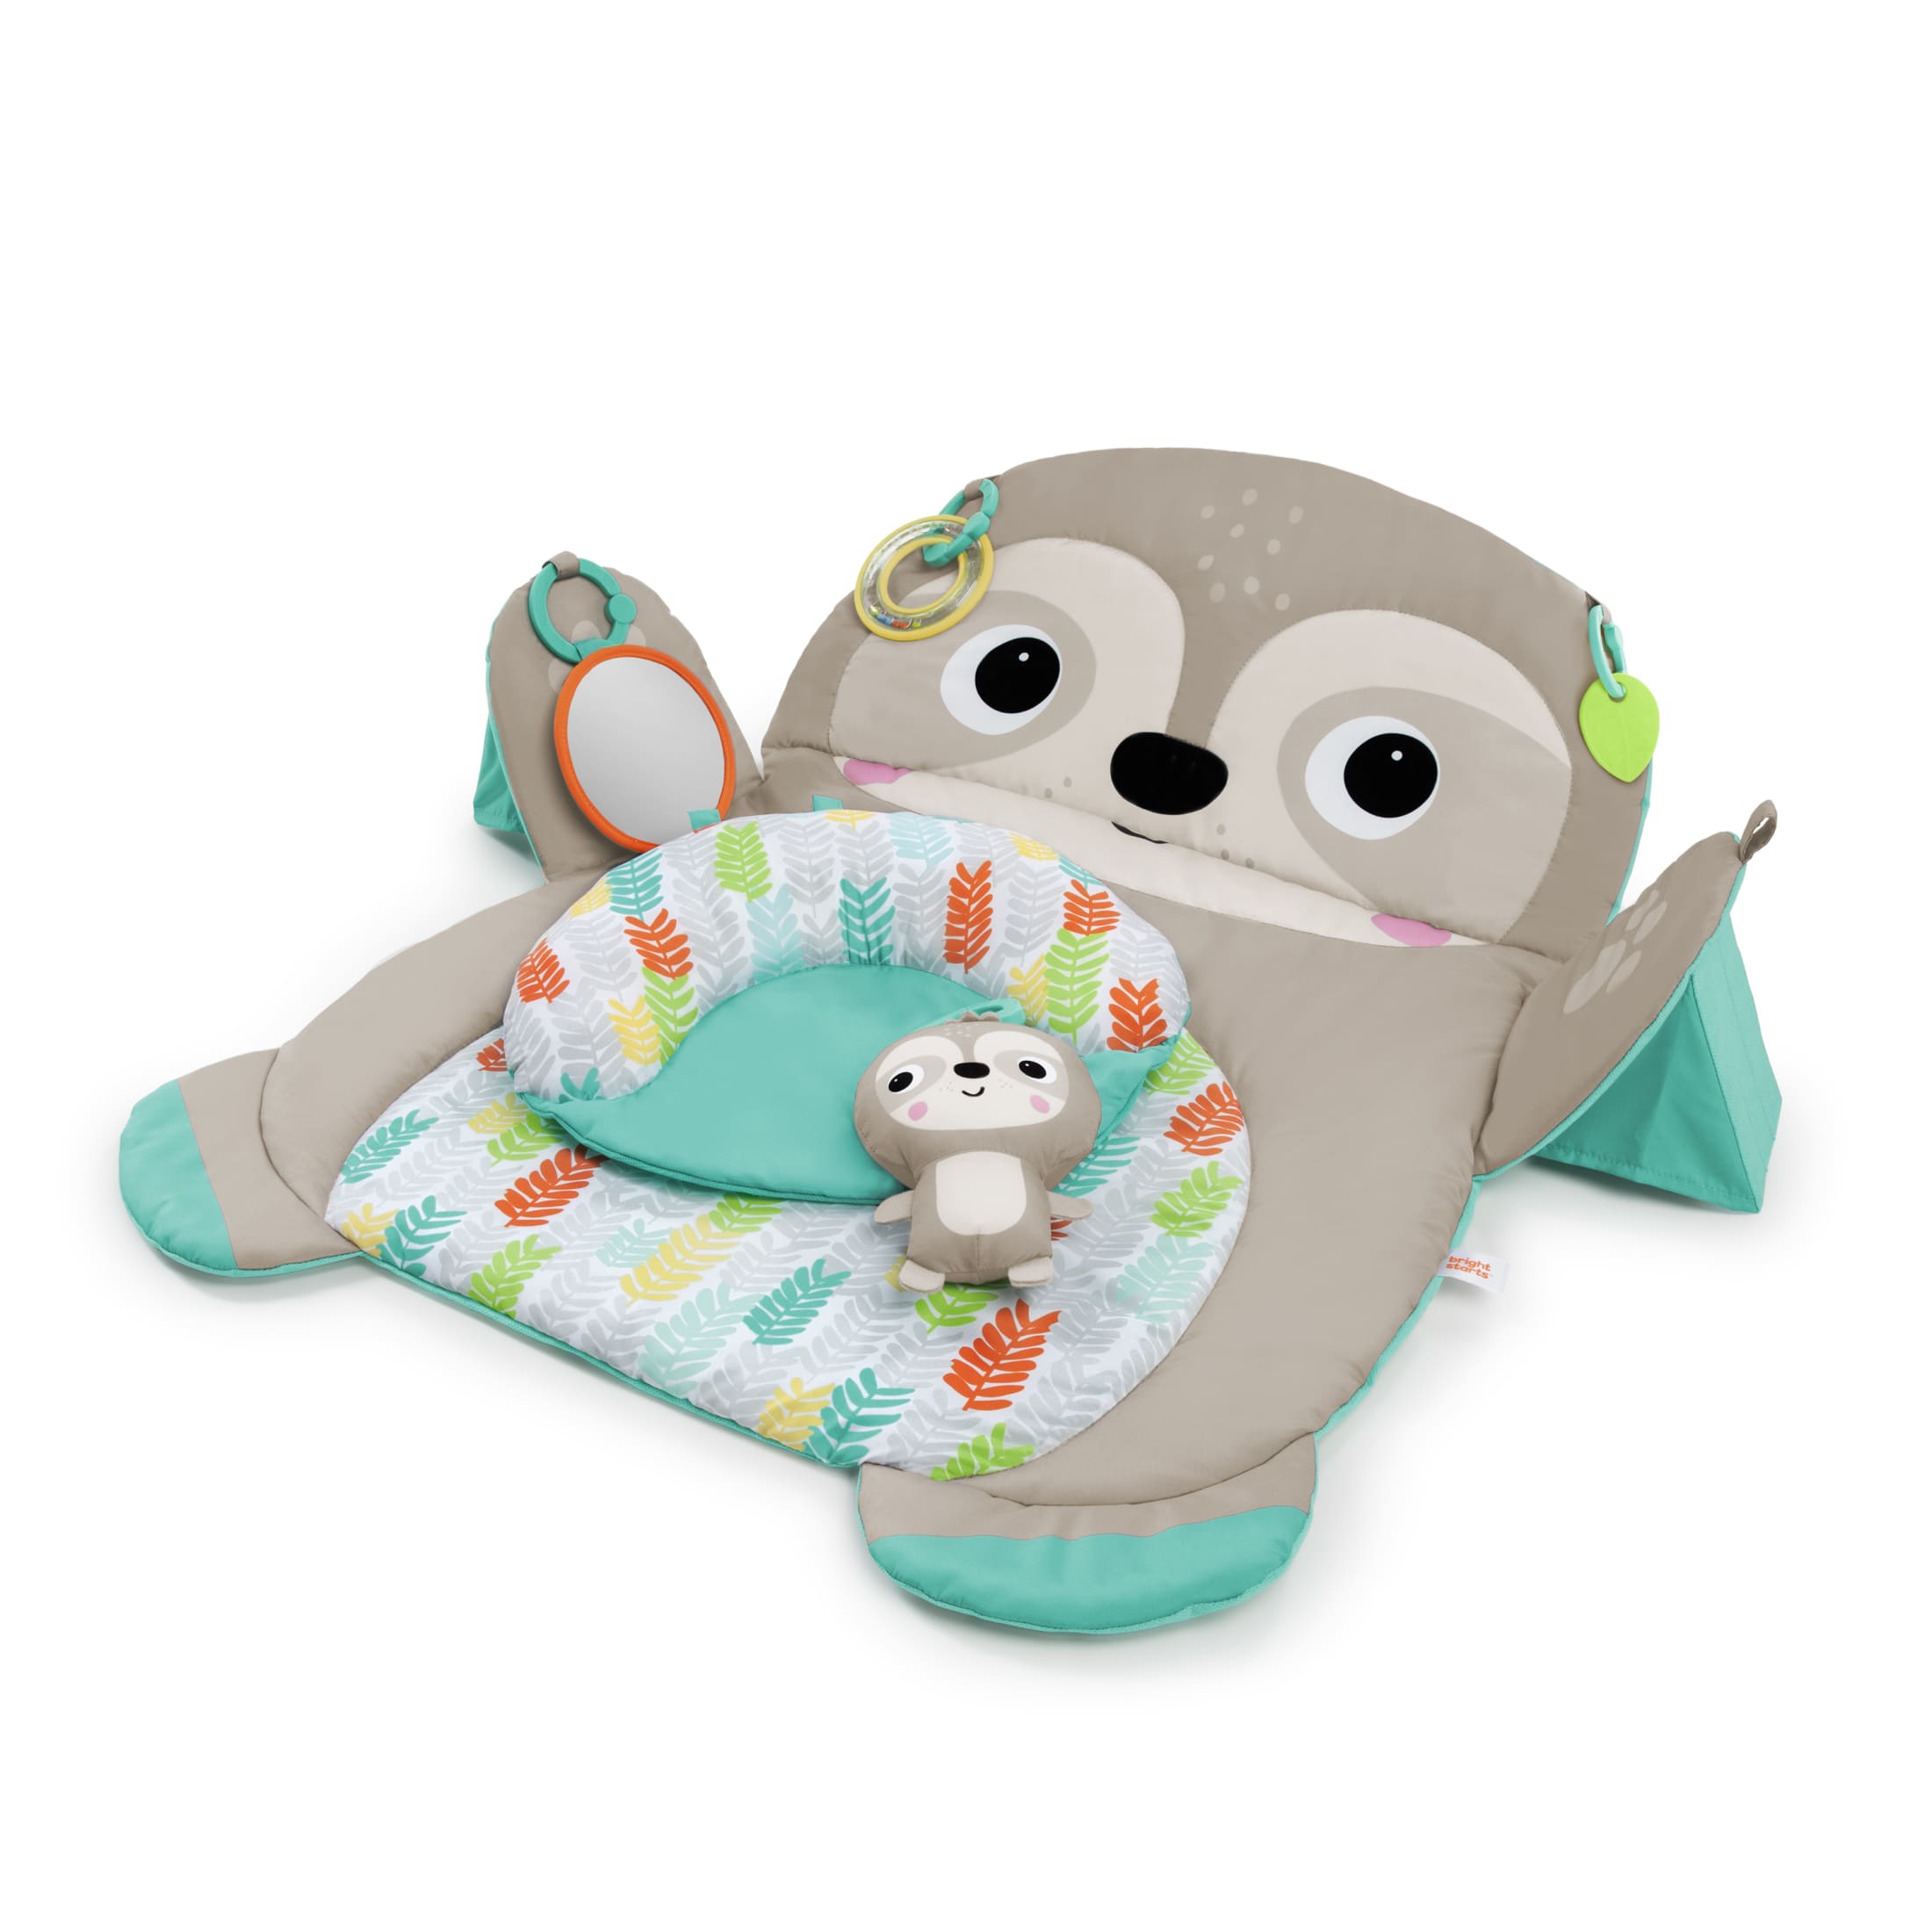 Bright Starts Tummy Time Prop & Play Baby Activity Mat for Infants, Sloth, Unisex - image 1 of 19